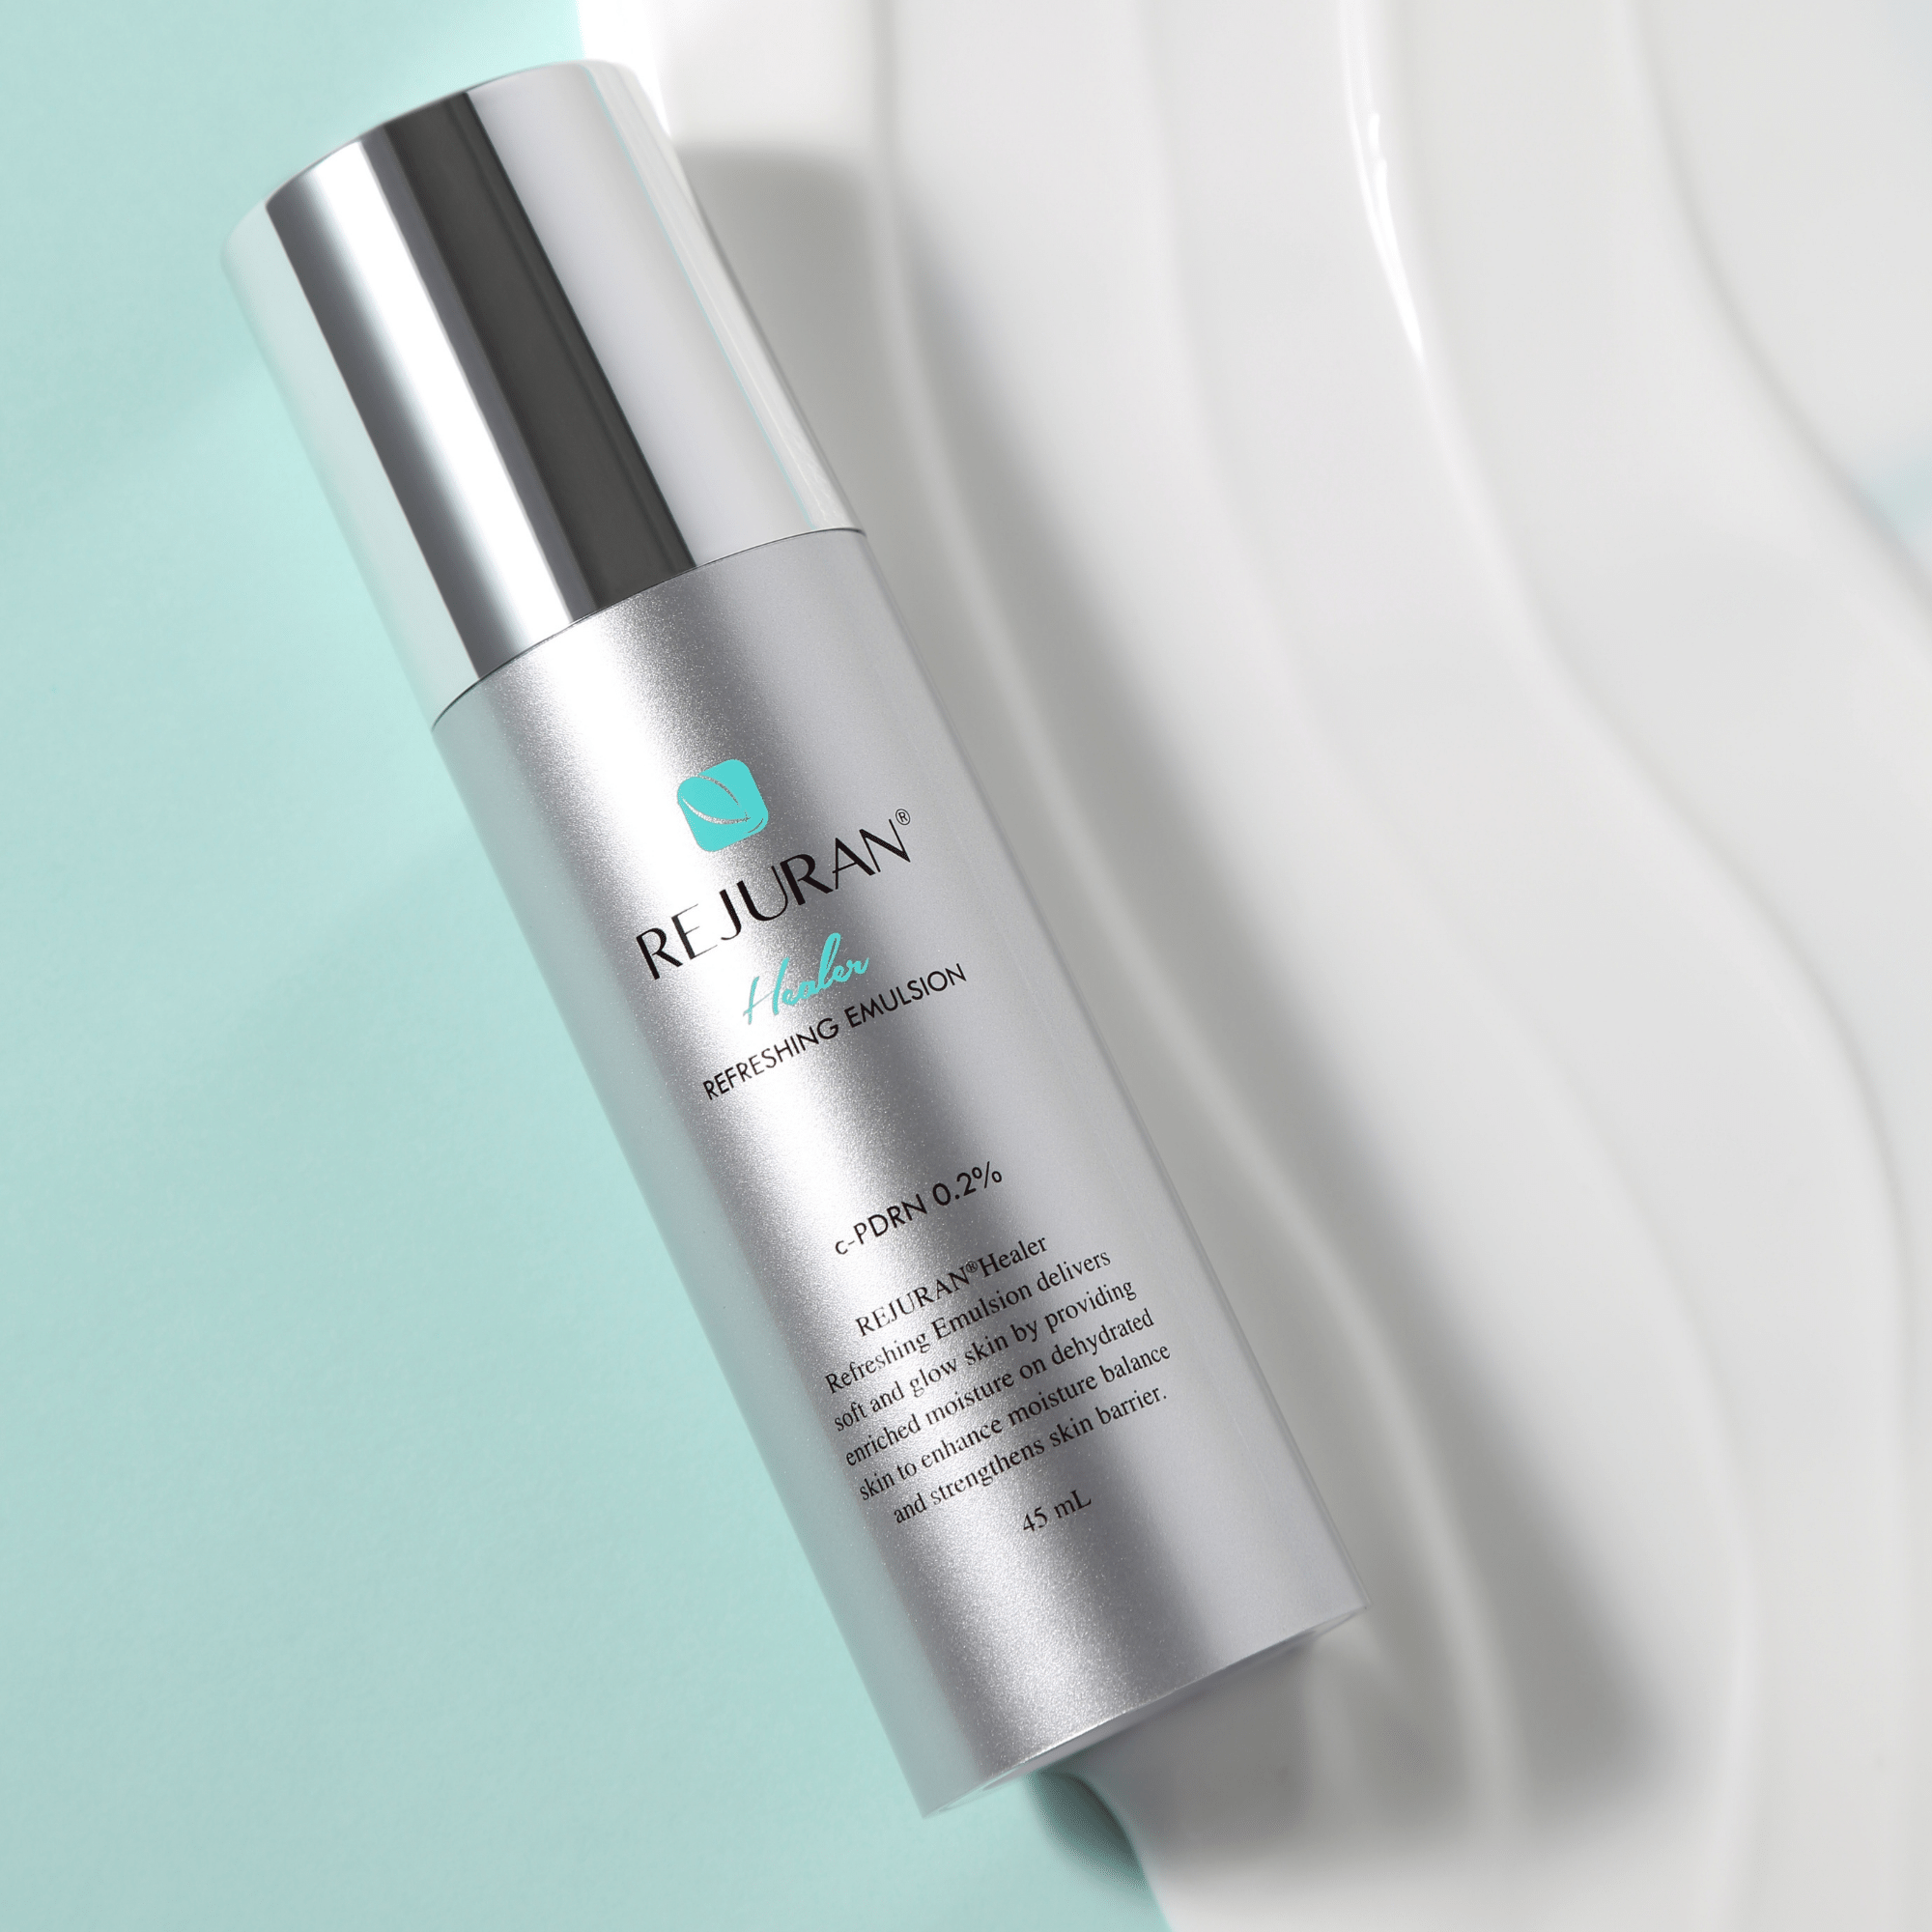 rejuran malaysia refreshing emulsion fuels your skin with bursts of hydration while revitalizing the skin for an instantly glowing complexion